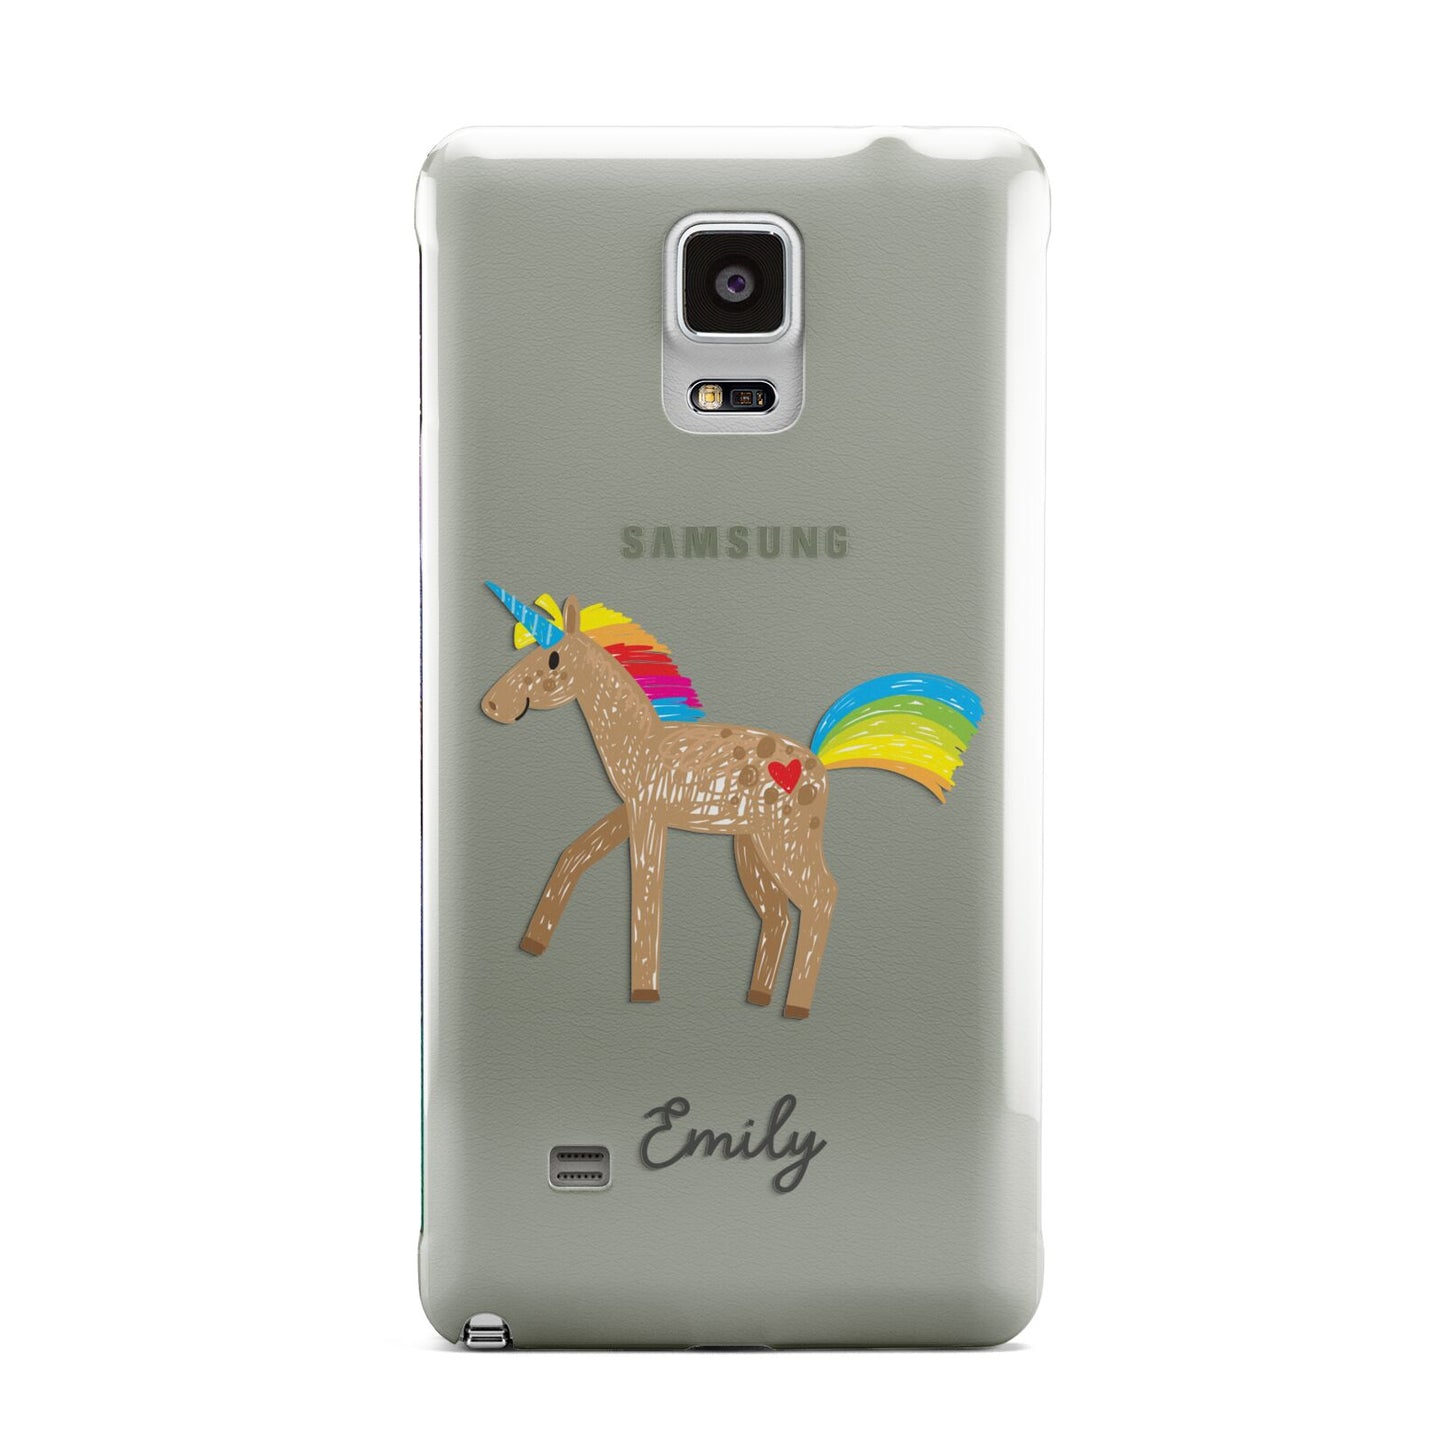 Personalised Unicorn with Name Samsung Galaxy Note 4 Case